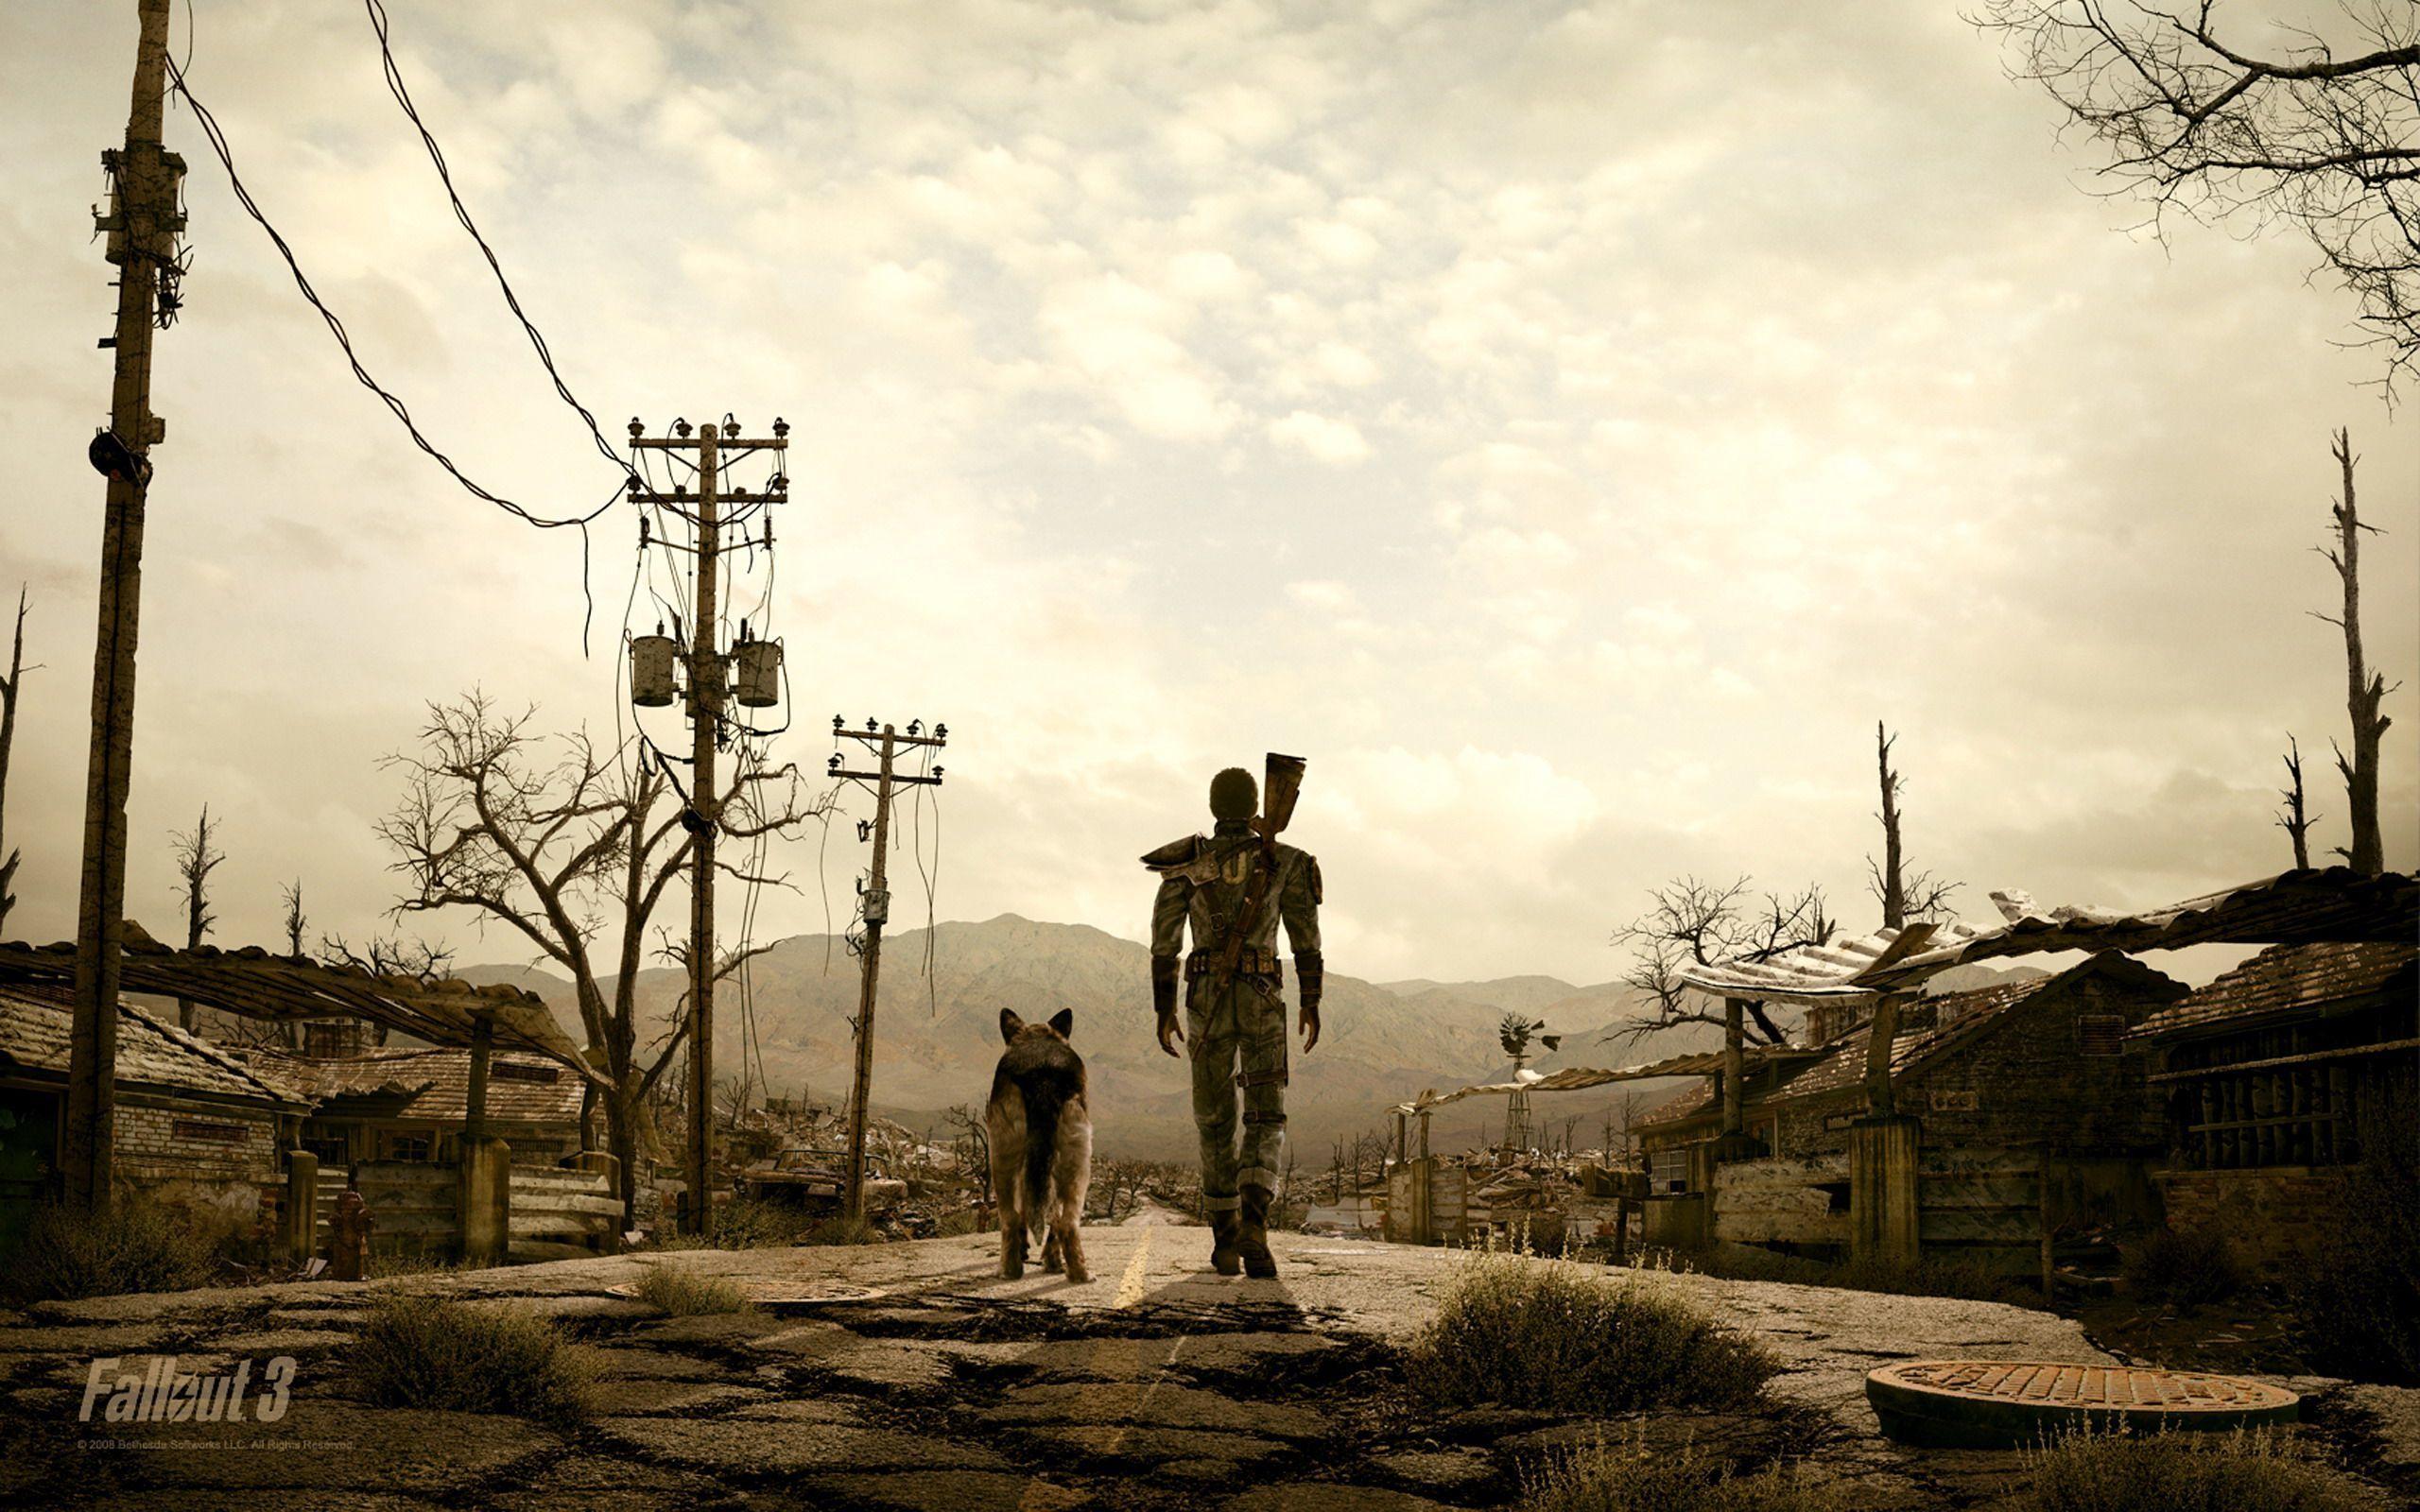 Fallout Hd Full Wallpapers, Fallout, Game